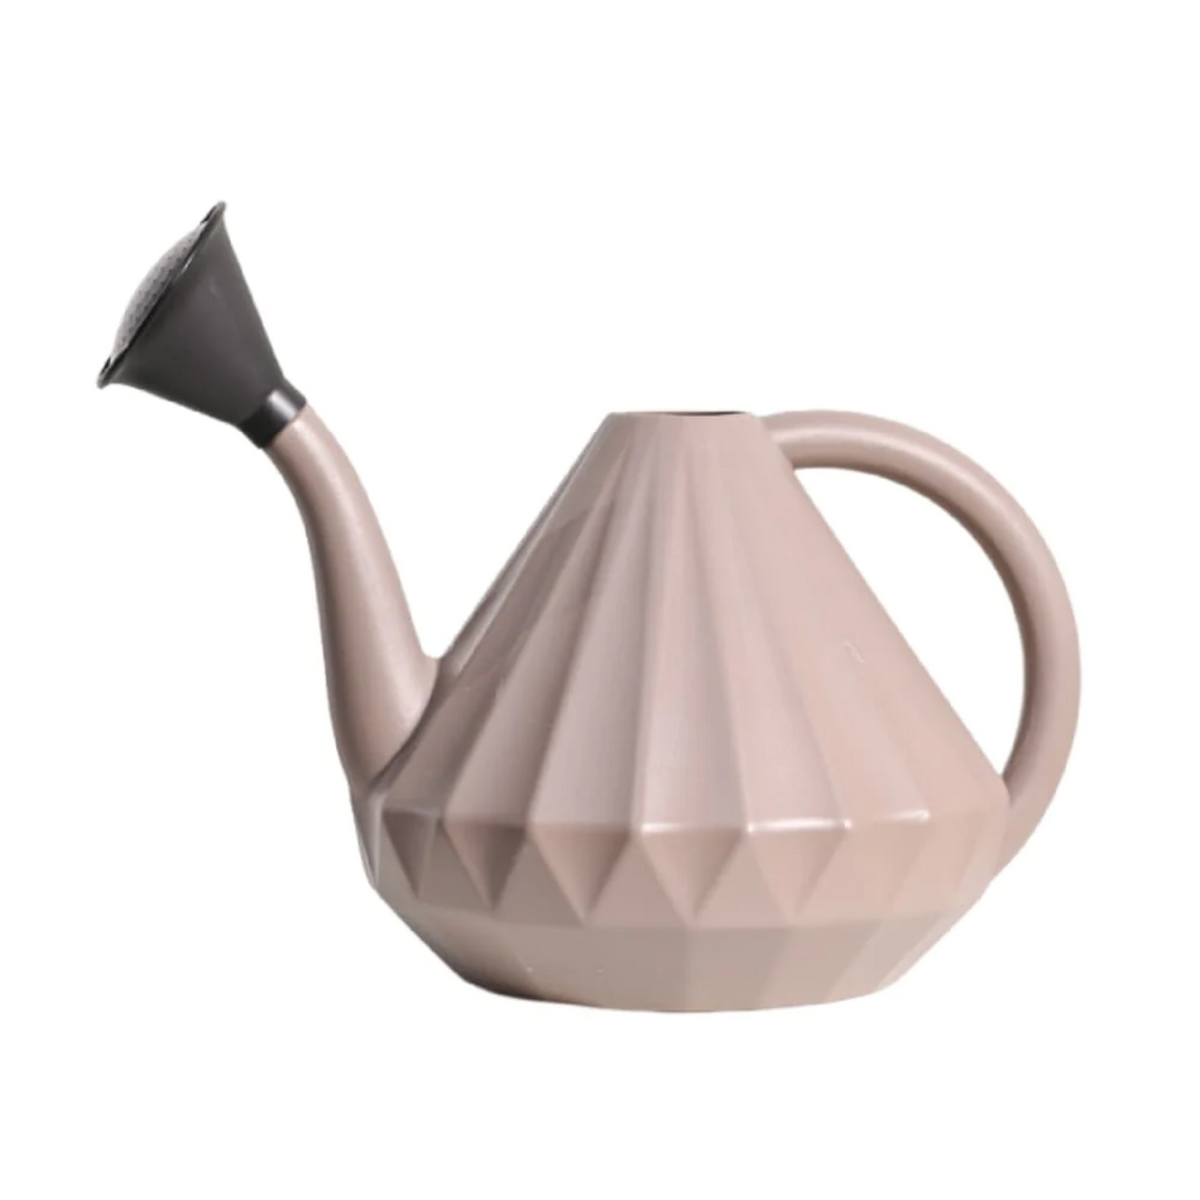 Ripples Watering Can 5 Litre for Gardening Fertilizing Watering Flowers Plants